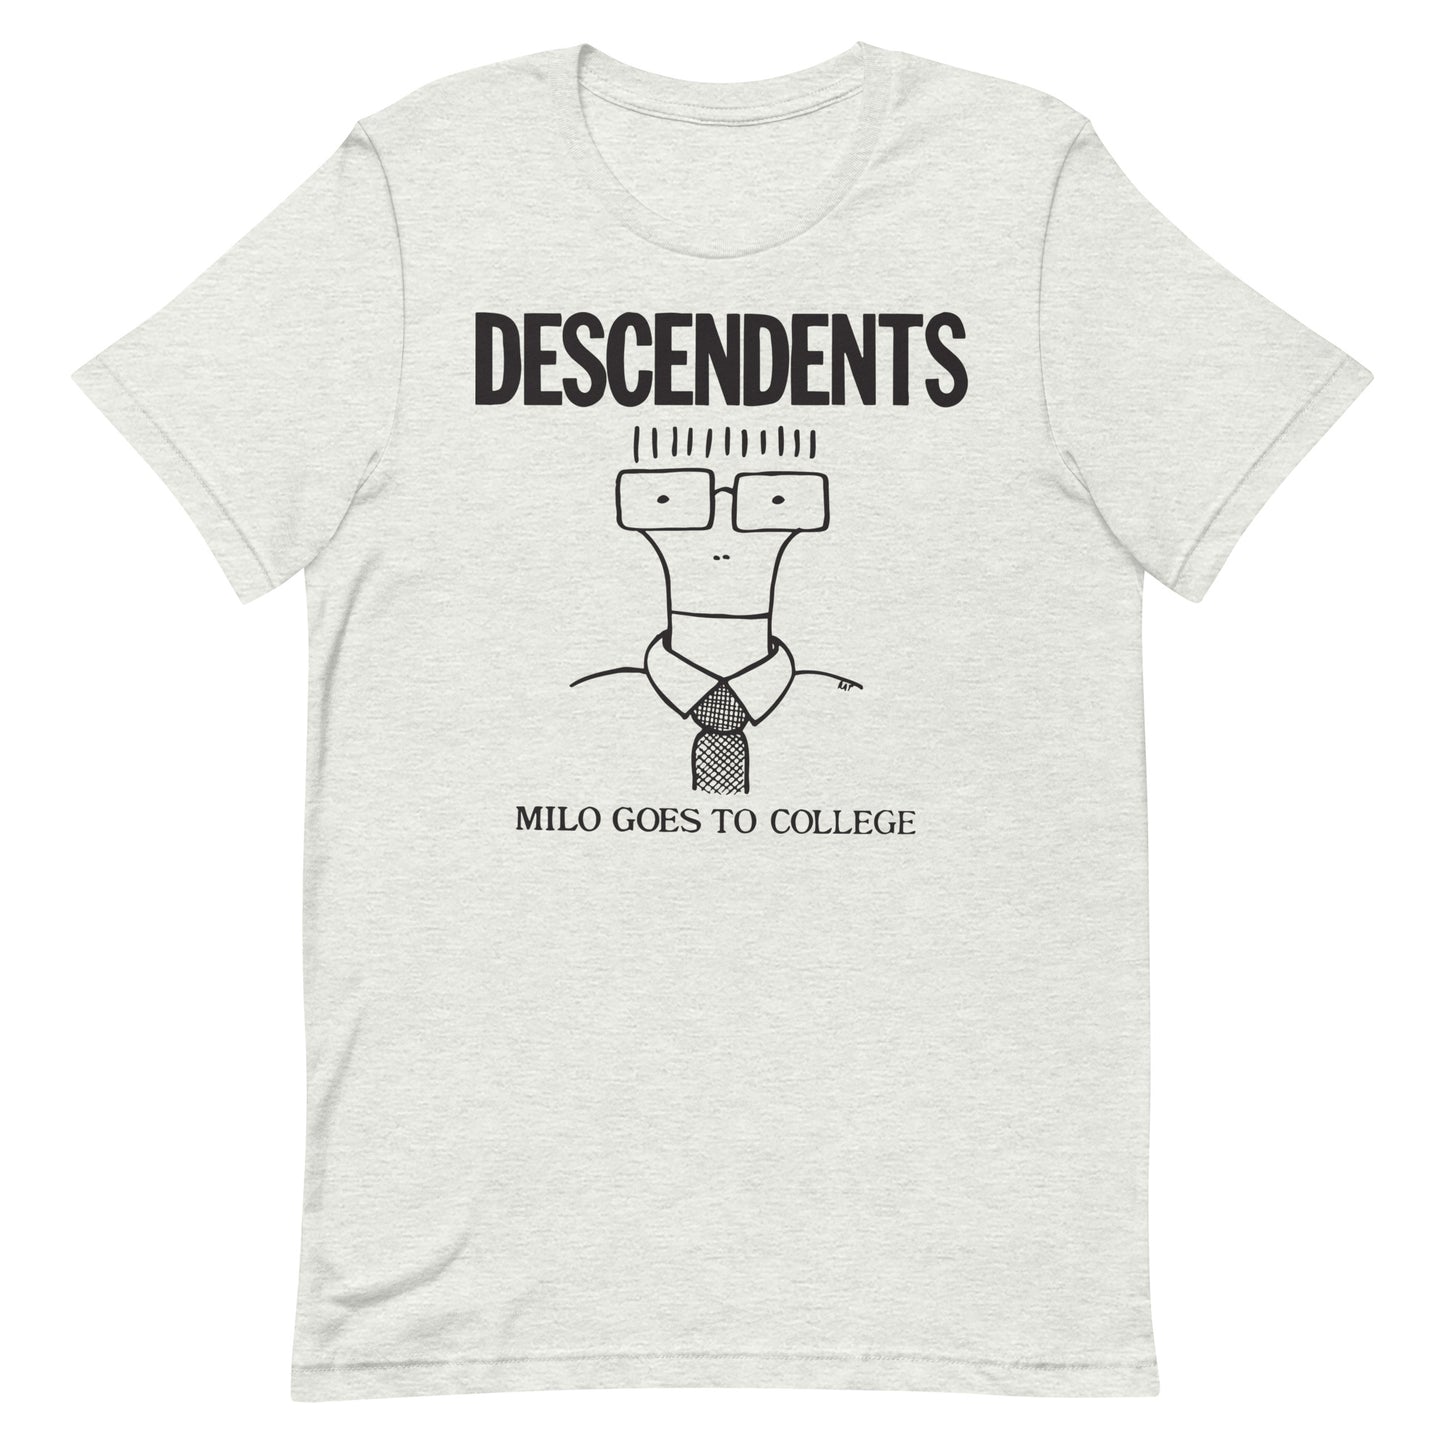 Descendents - Milo Goes To College T-Shirt